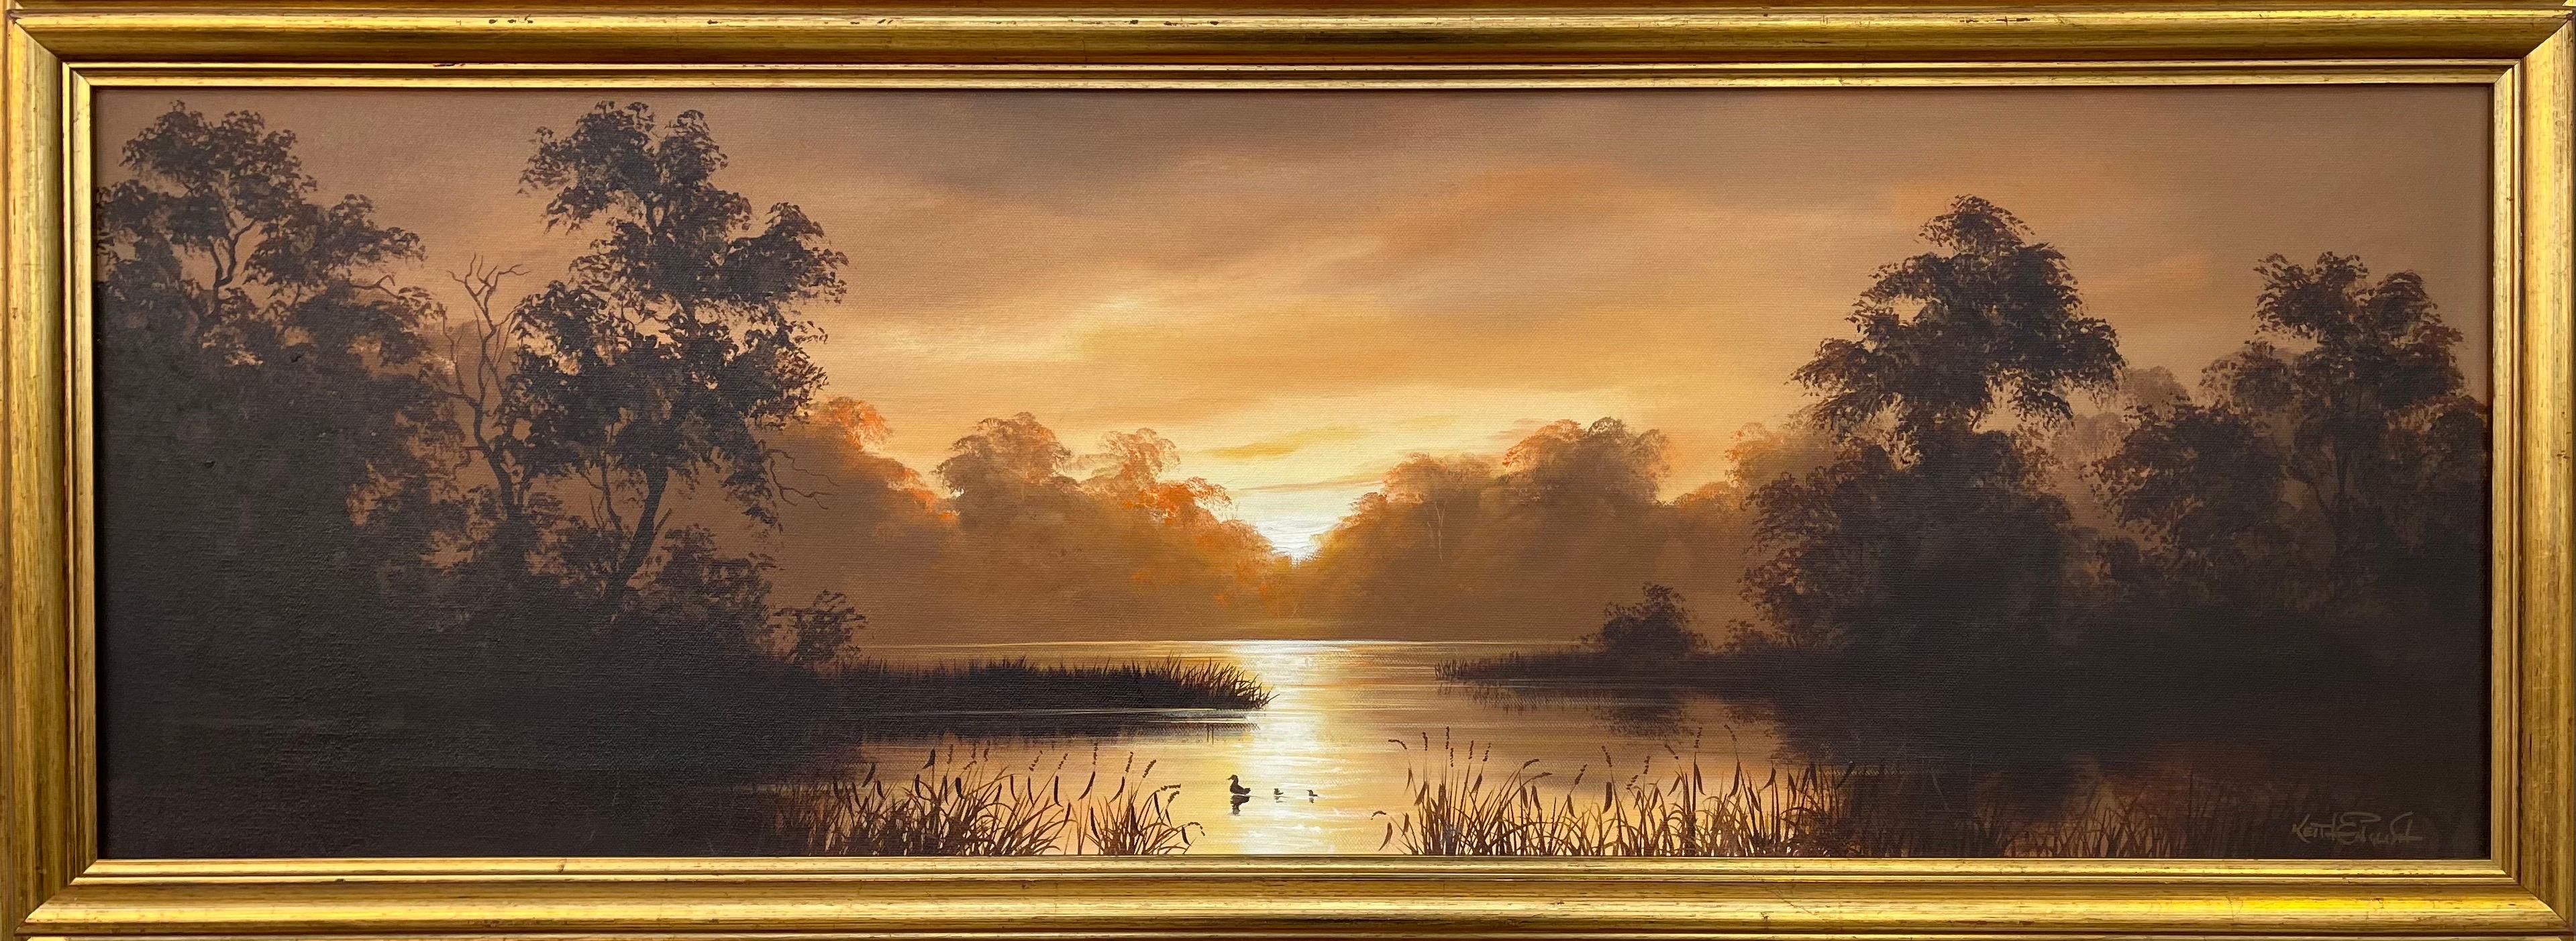 Keith English Landscape Painting - Oil Painting of River Sunset Landscape in Warm Brown Colours by British Artist